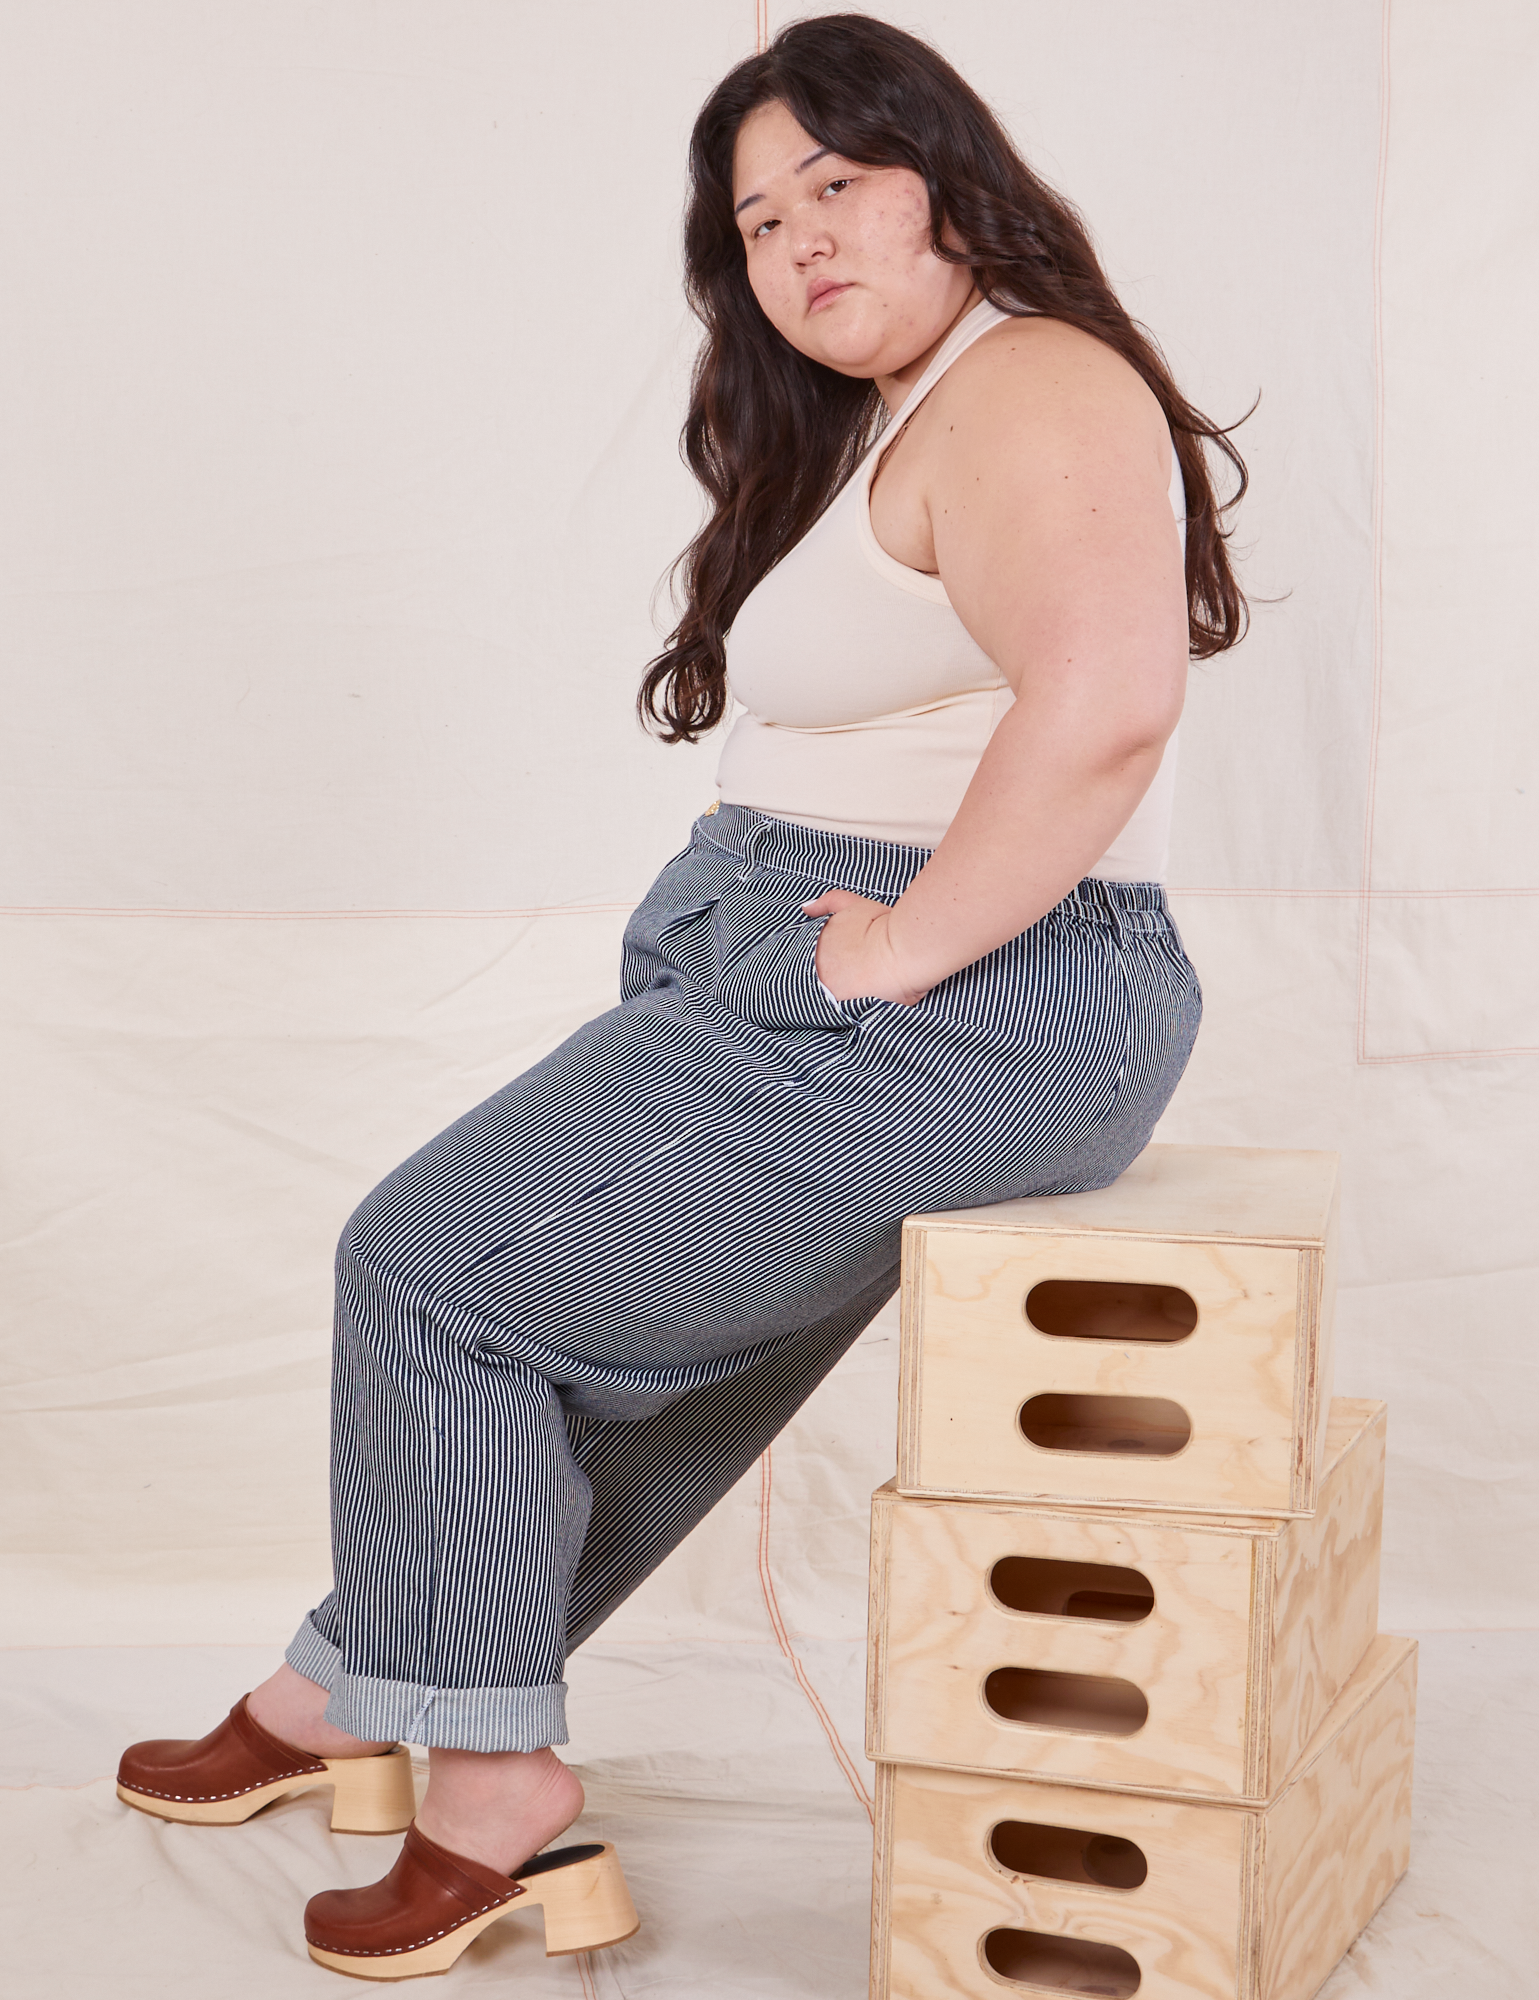 Ashley is sitting sideways on a stack of wooden crates. She is wearing Denim Trouser Jeans in Railroad Stripe and Tank Top in vintage tee off-white